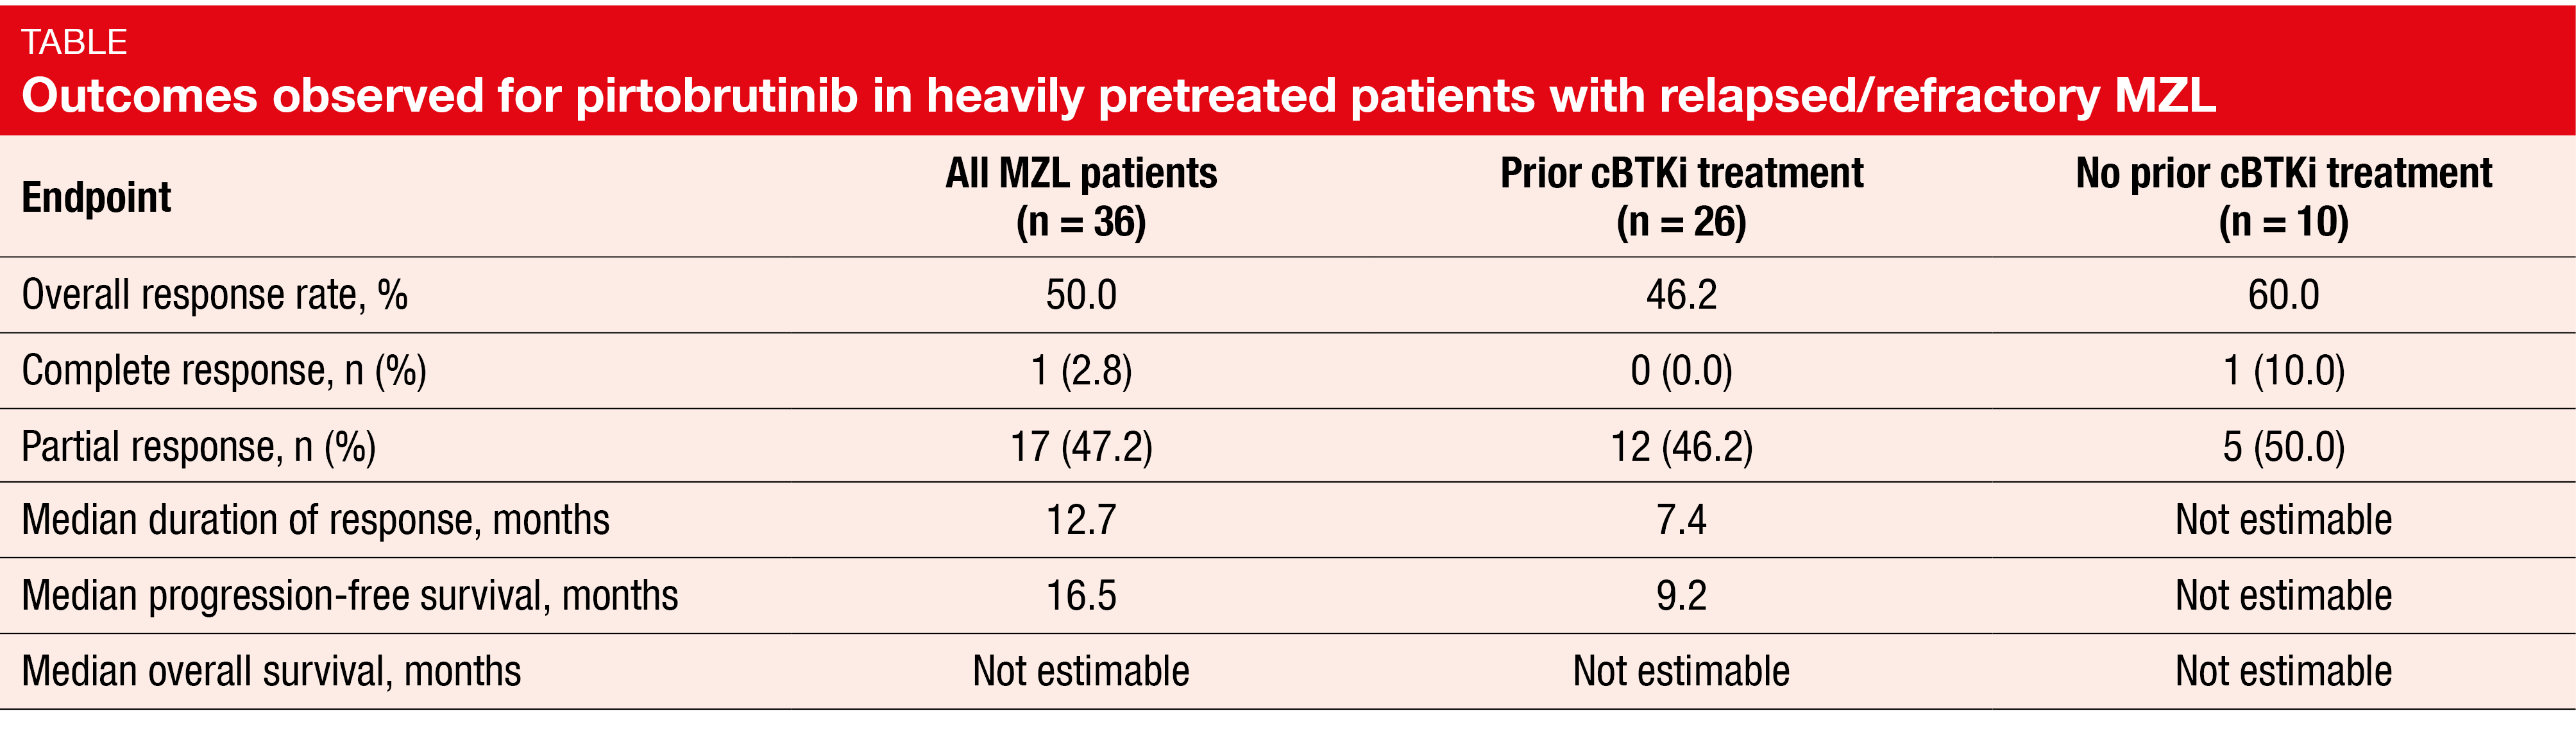 Table Outcomes observed for pirtobrutinib in heavily pretreated patients with relapsed/refractory MZL